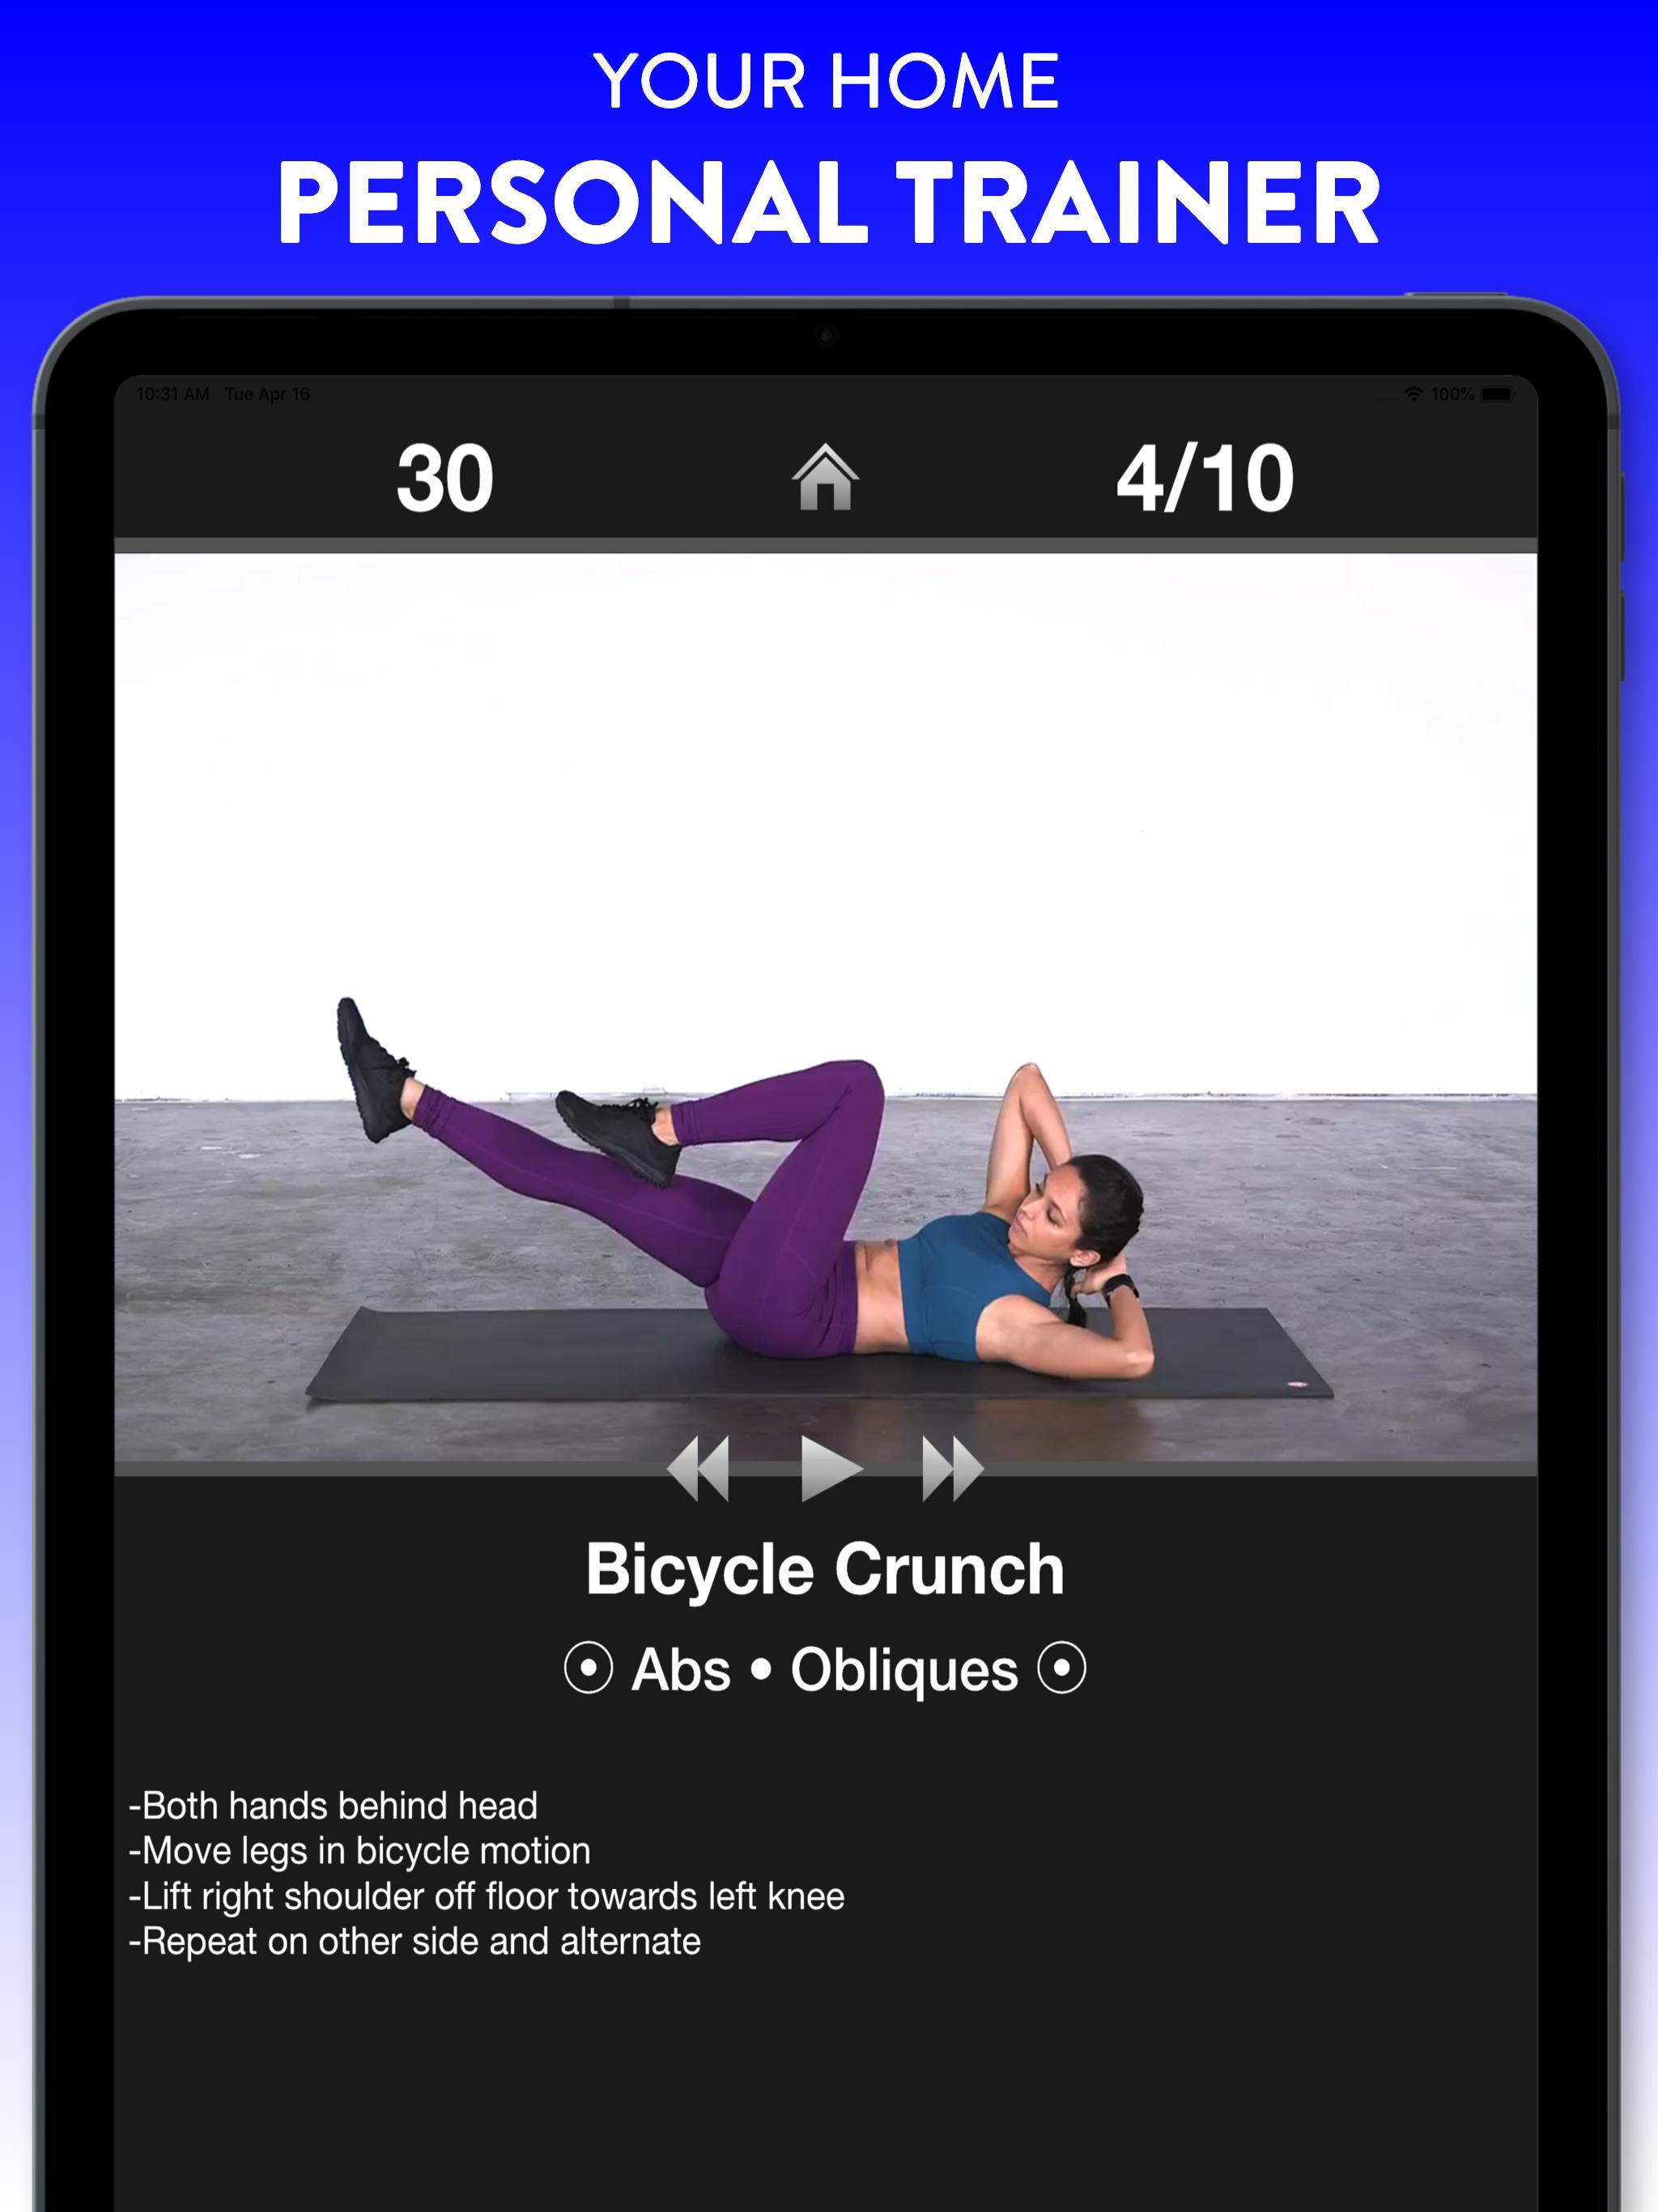 Daily Workouts - Exercise Fitness Workout Trainer 6.12 Screenshot 6